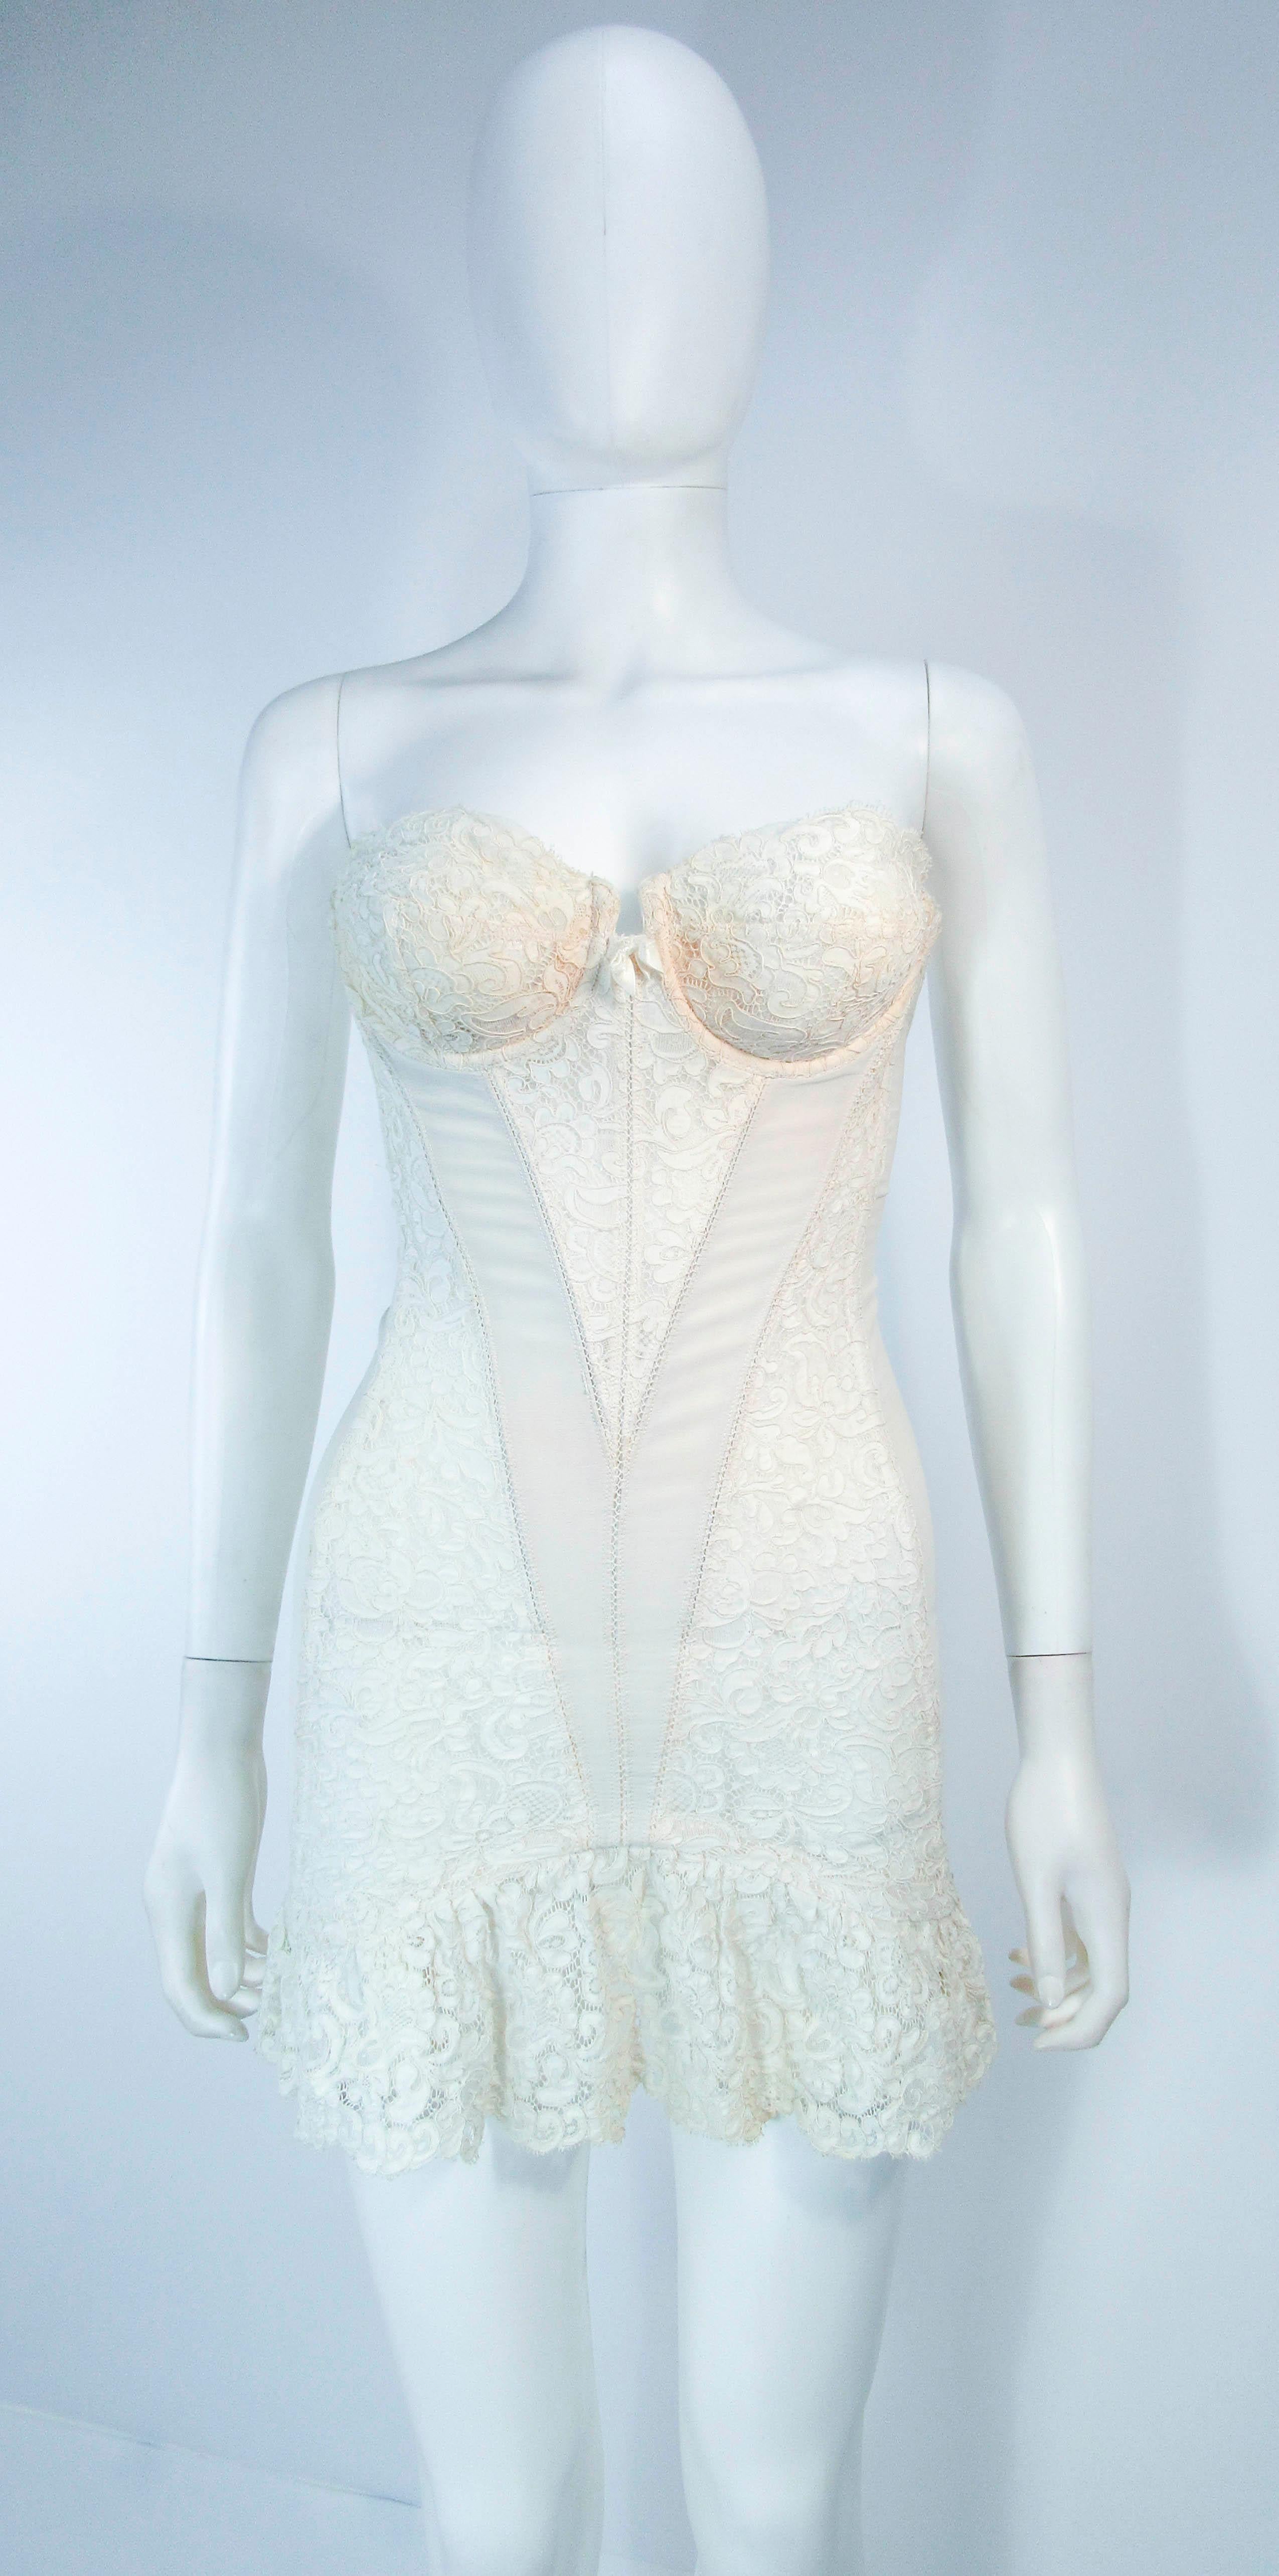 This Warners Champs Elysess Collection Merry Widow is composed of an off white stretch fabric & lace trim/accenting. There are center front hooks and eye closures. In excellent vintage condition.

**Please cross-reference measurements for personal